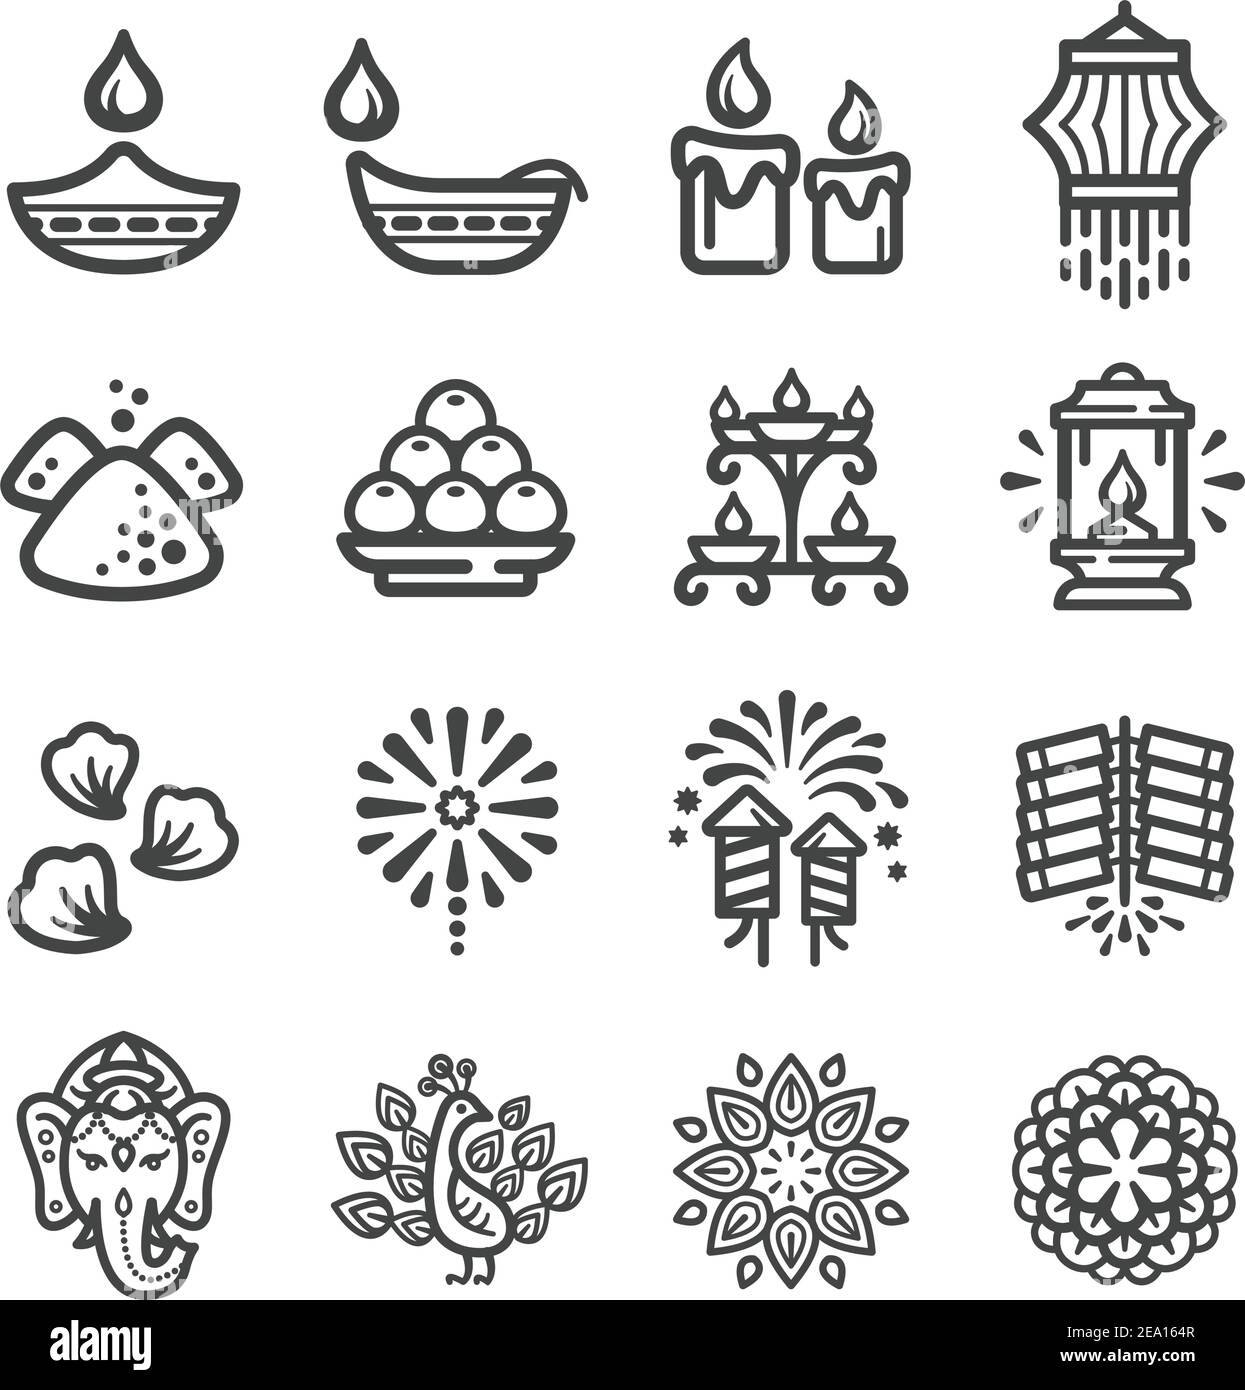 happy diwali festival and celebration icon set,vector and illustration Stock Vector